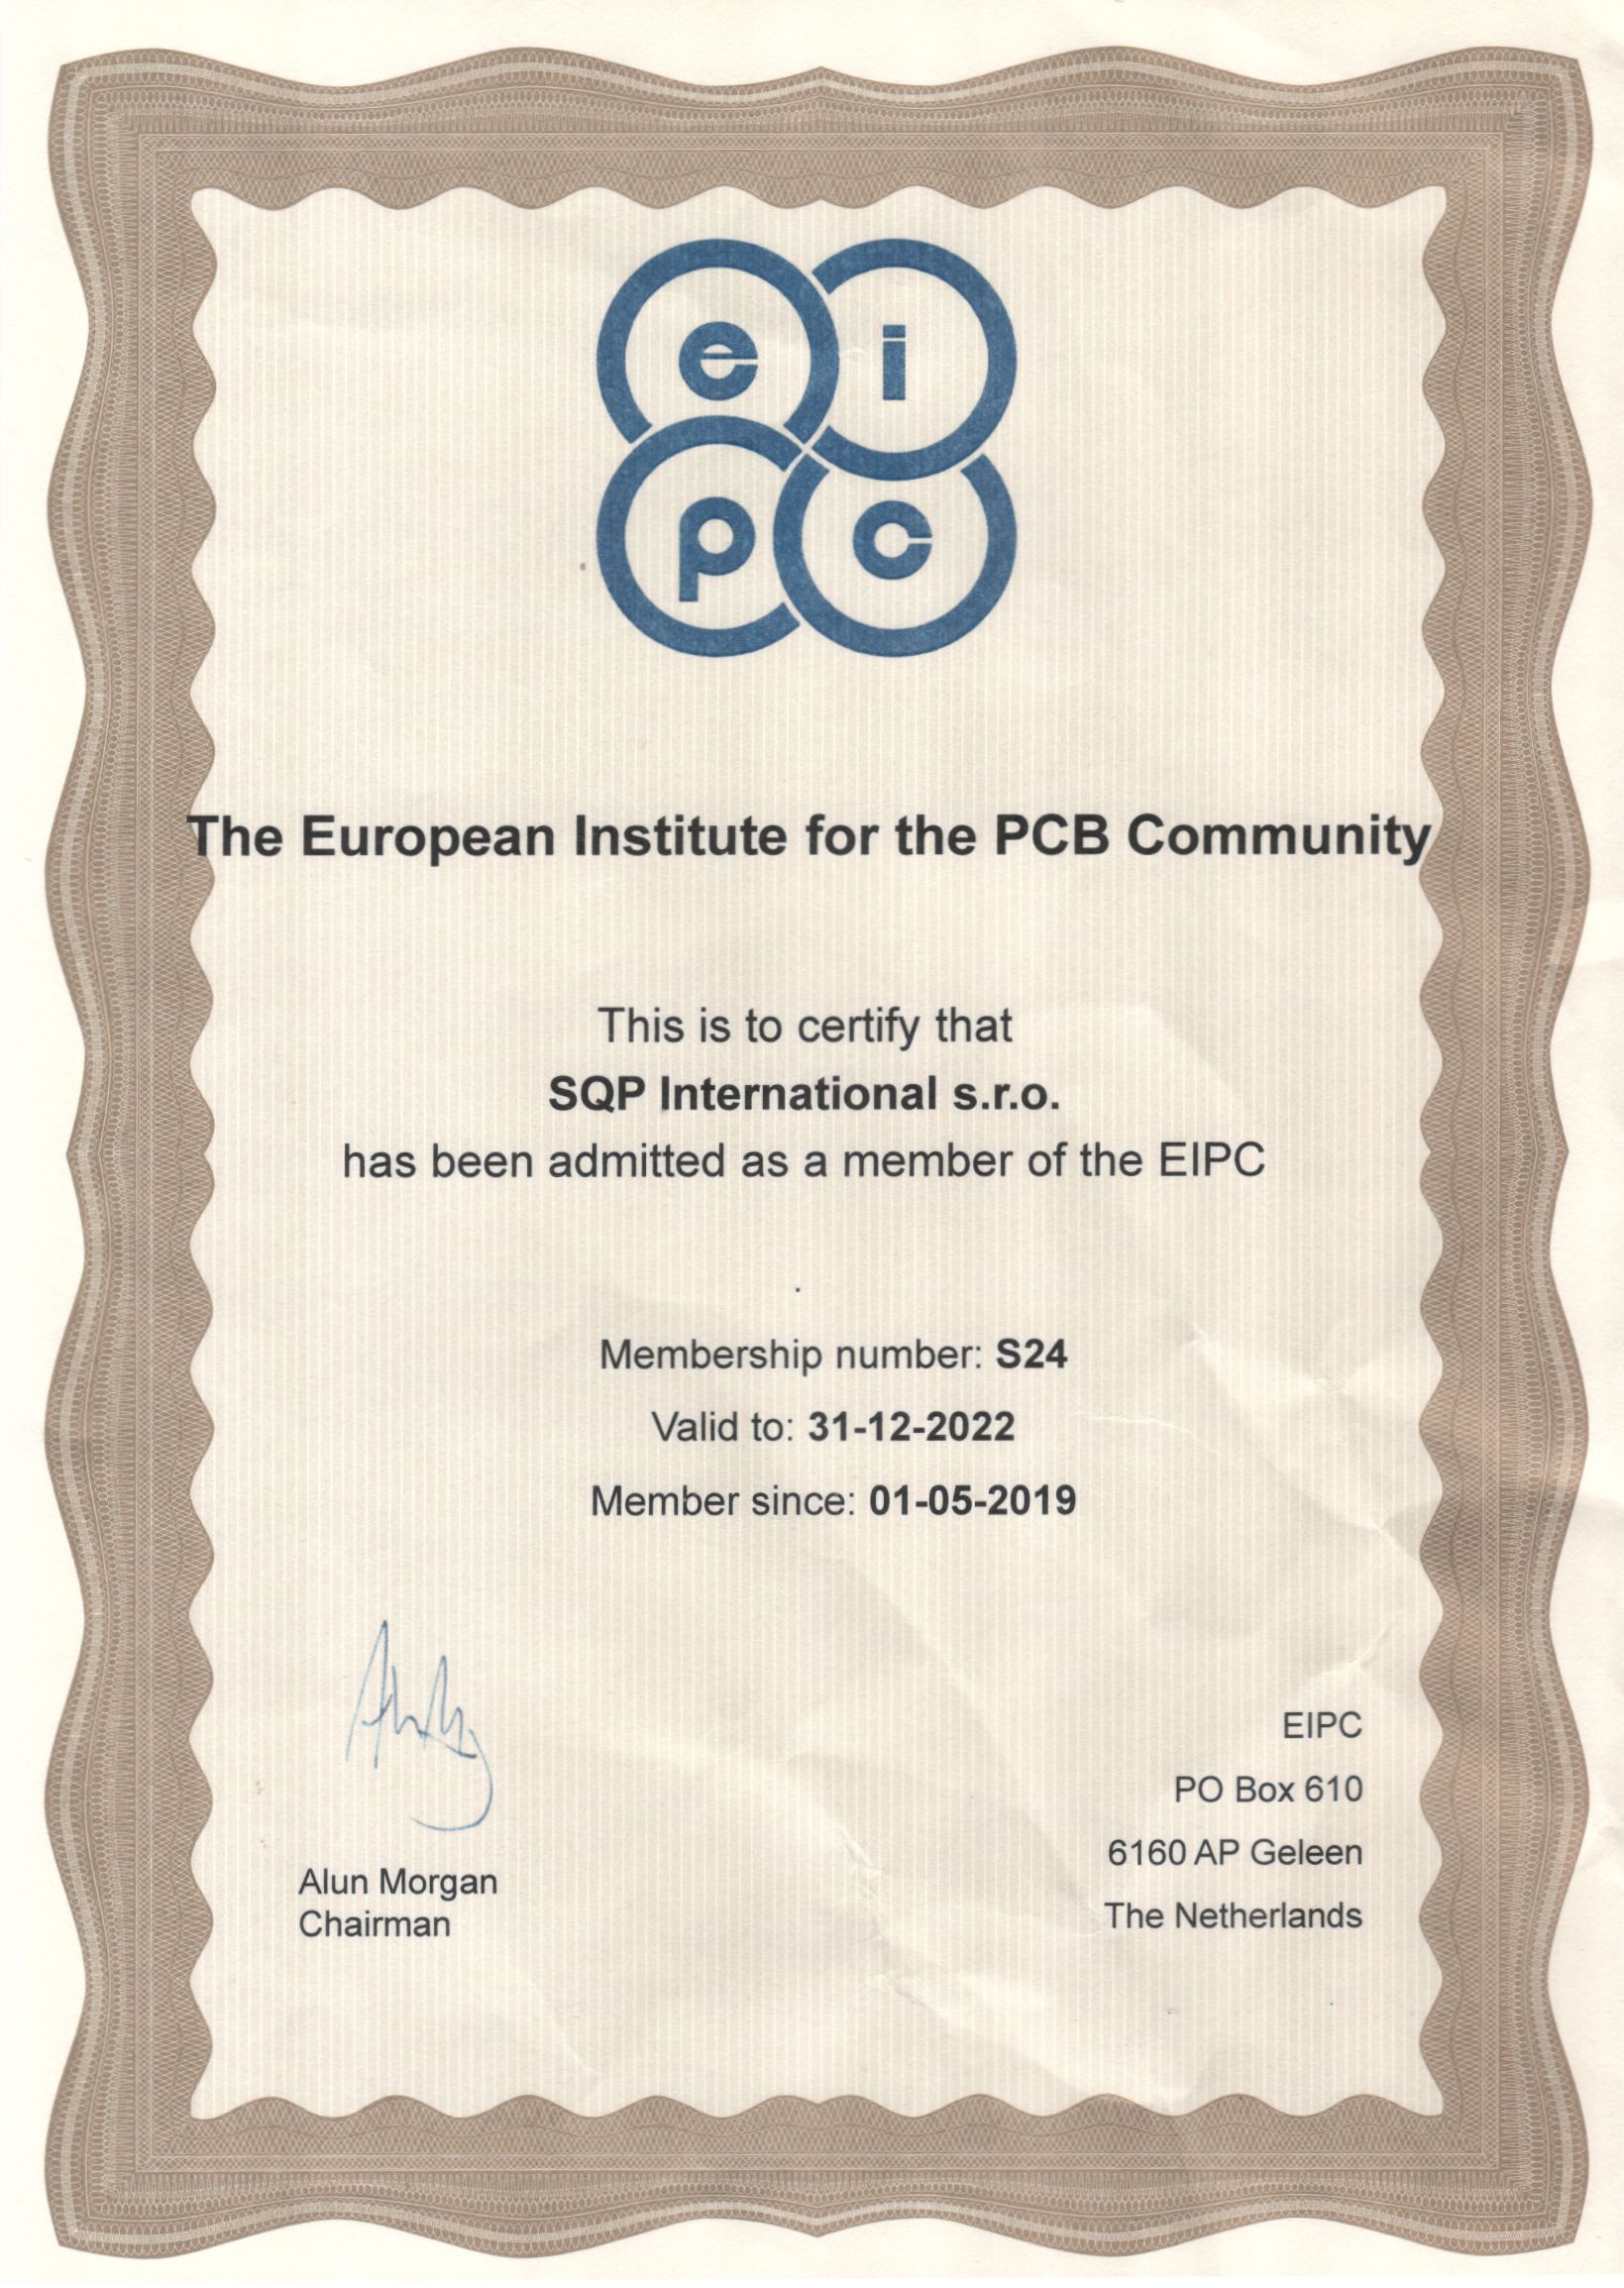 SQP International s.r.o. is a member of the EIPC